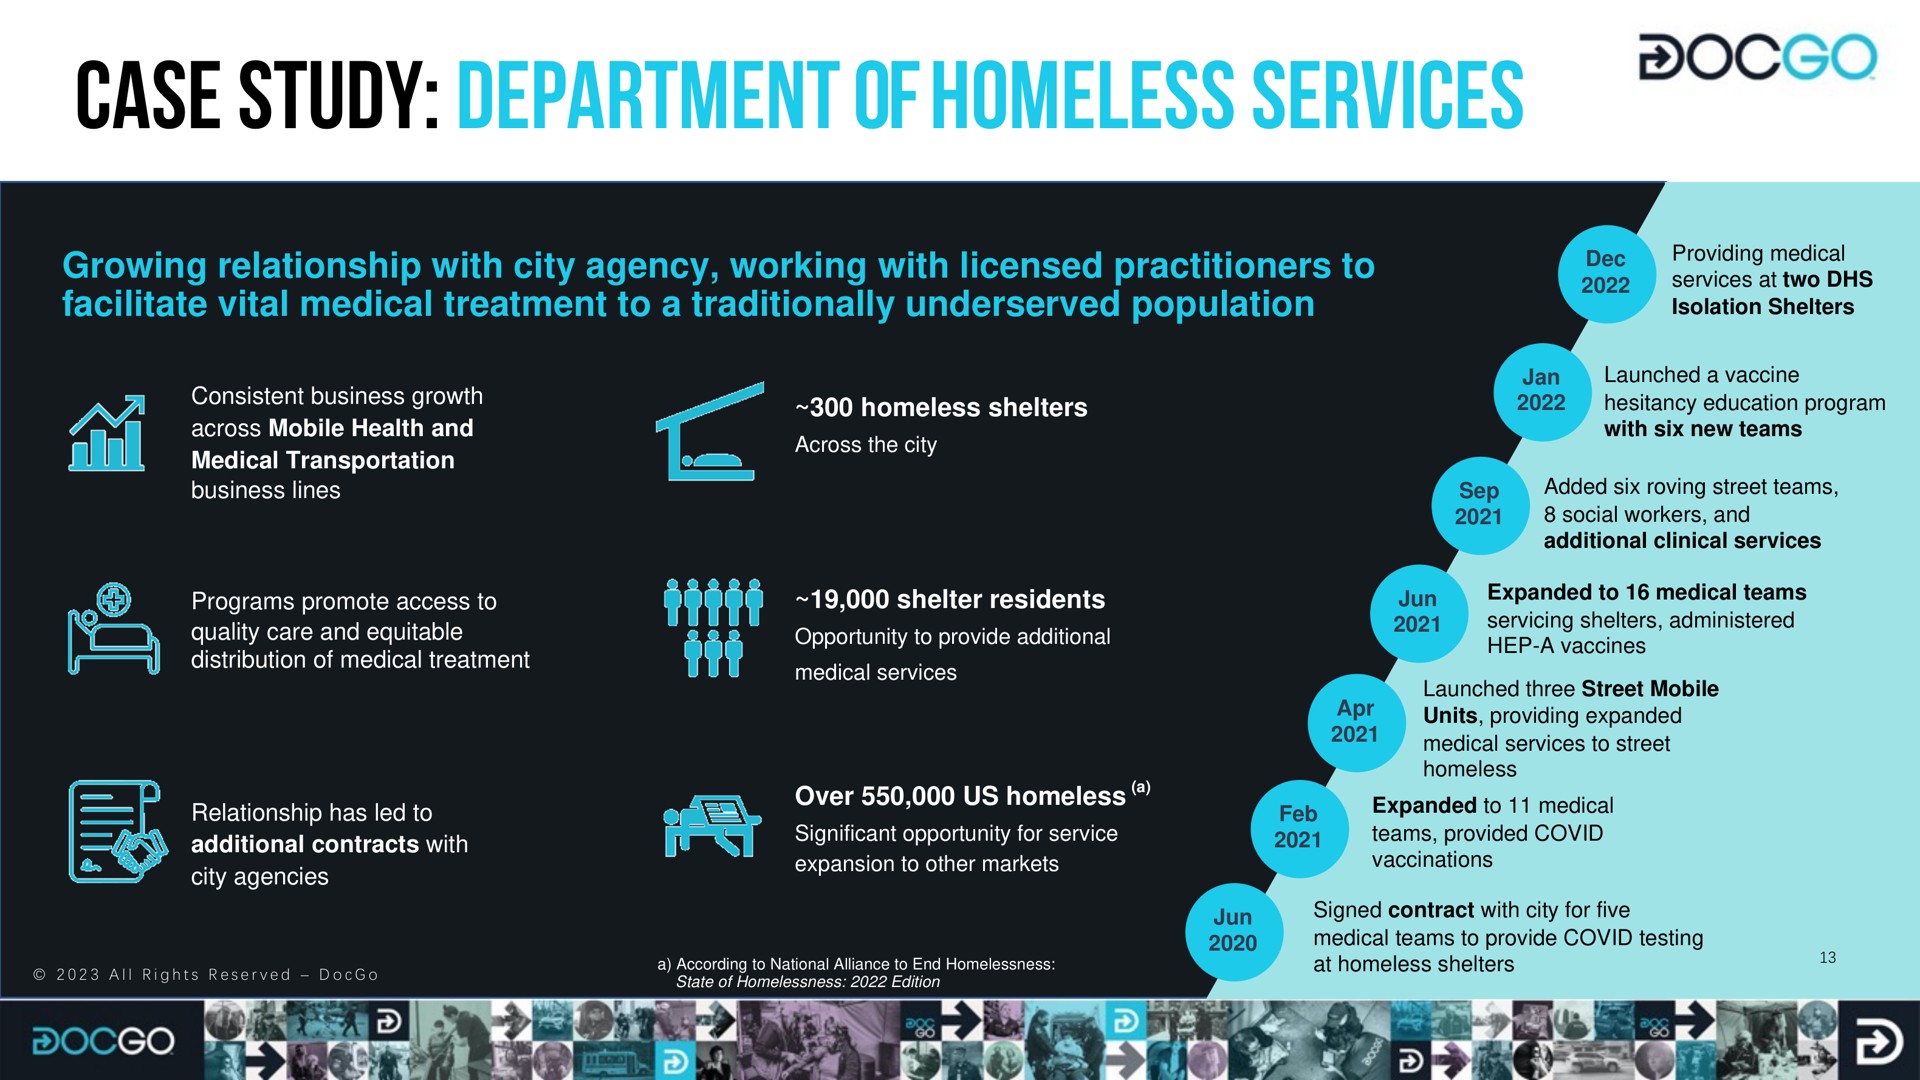 case study department of homeless services seal a din are oes | DocGo